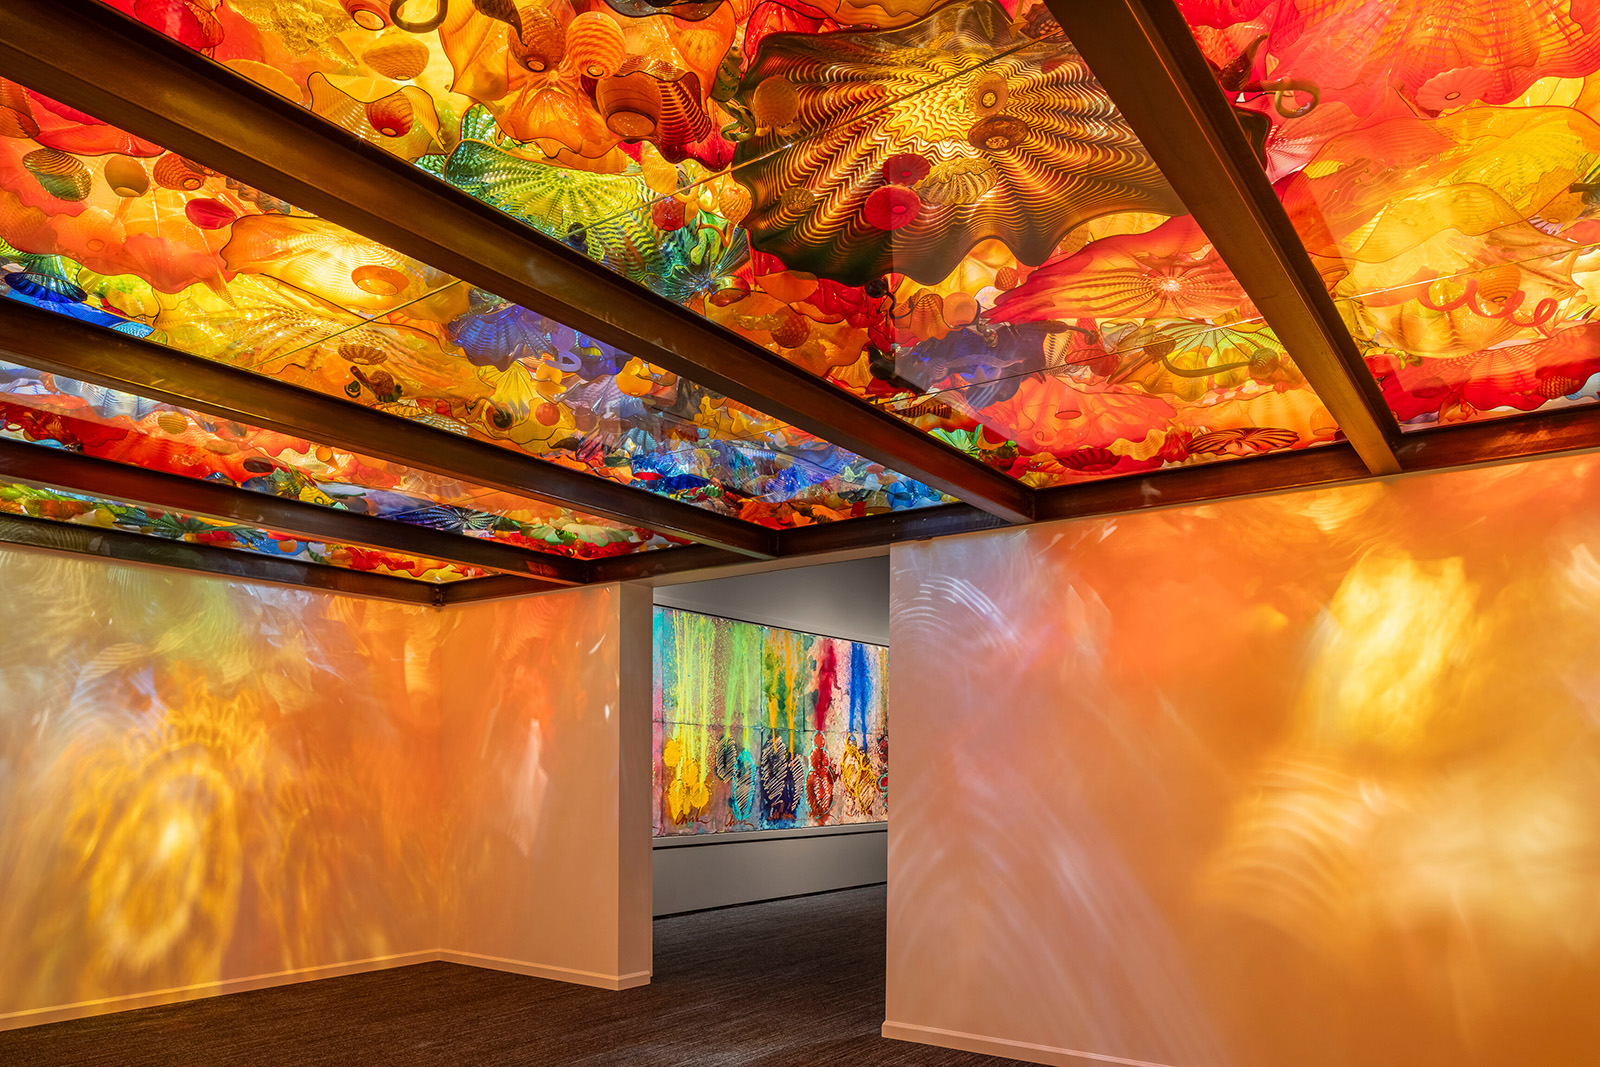 Chihuly, Persian Ceiling, 2012